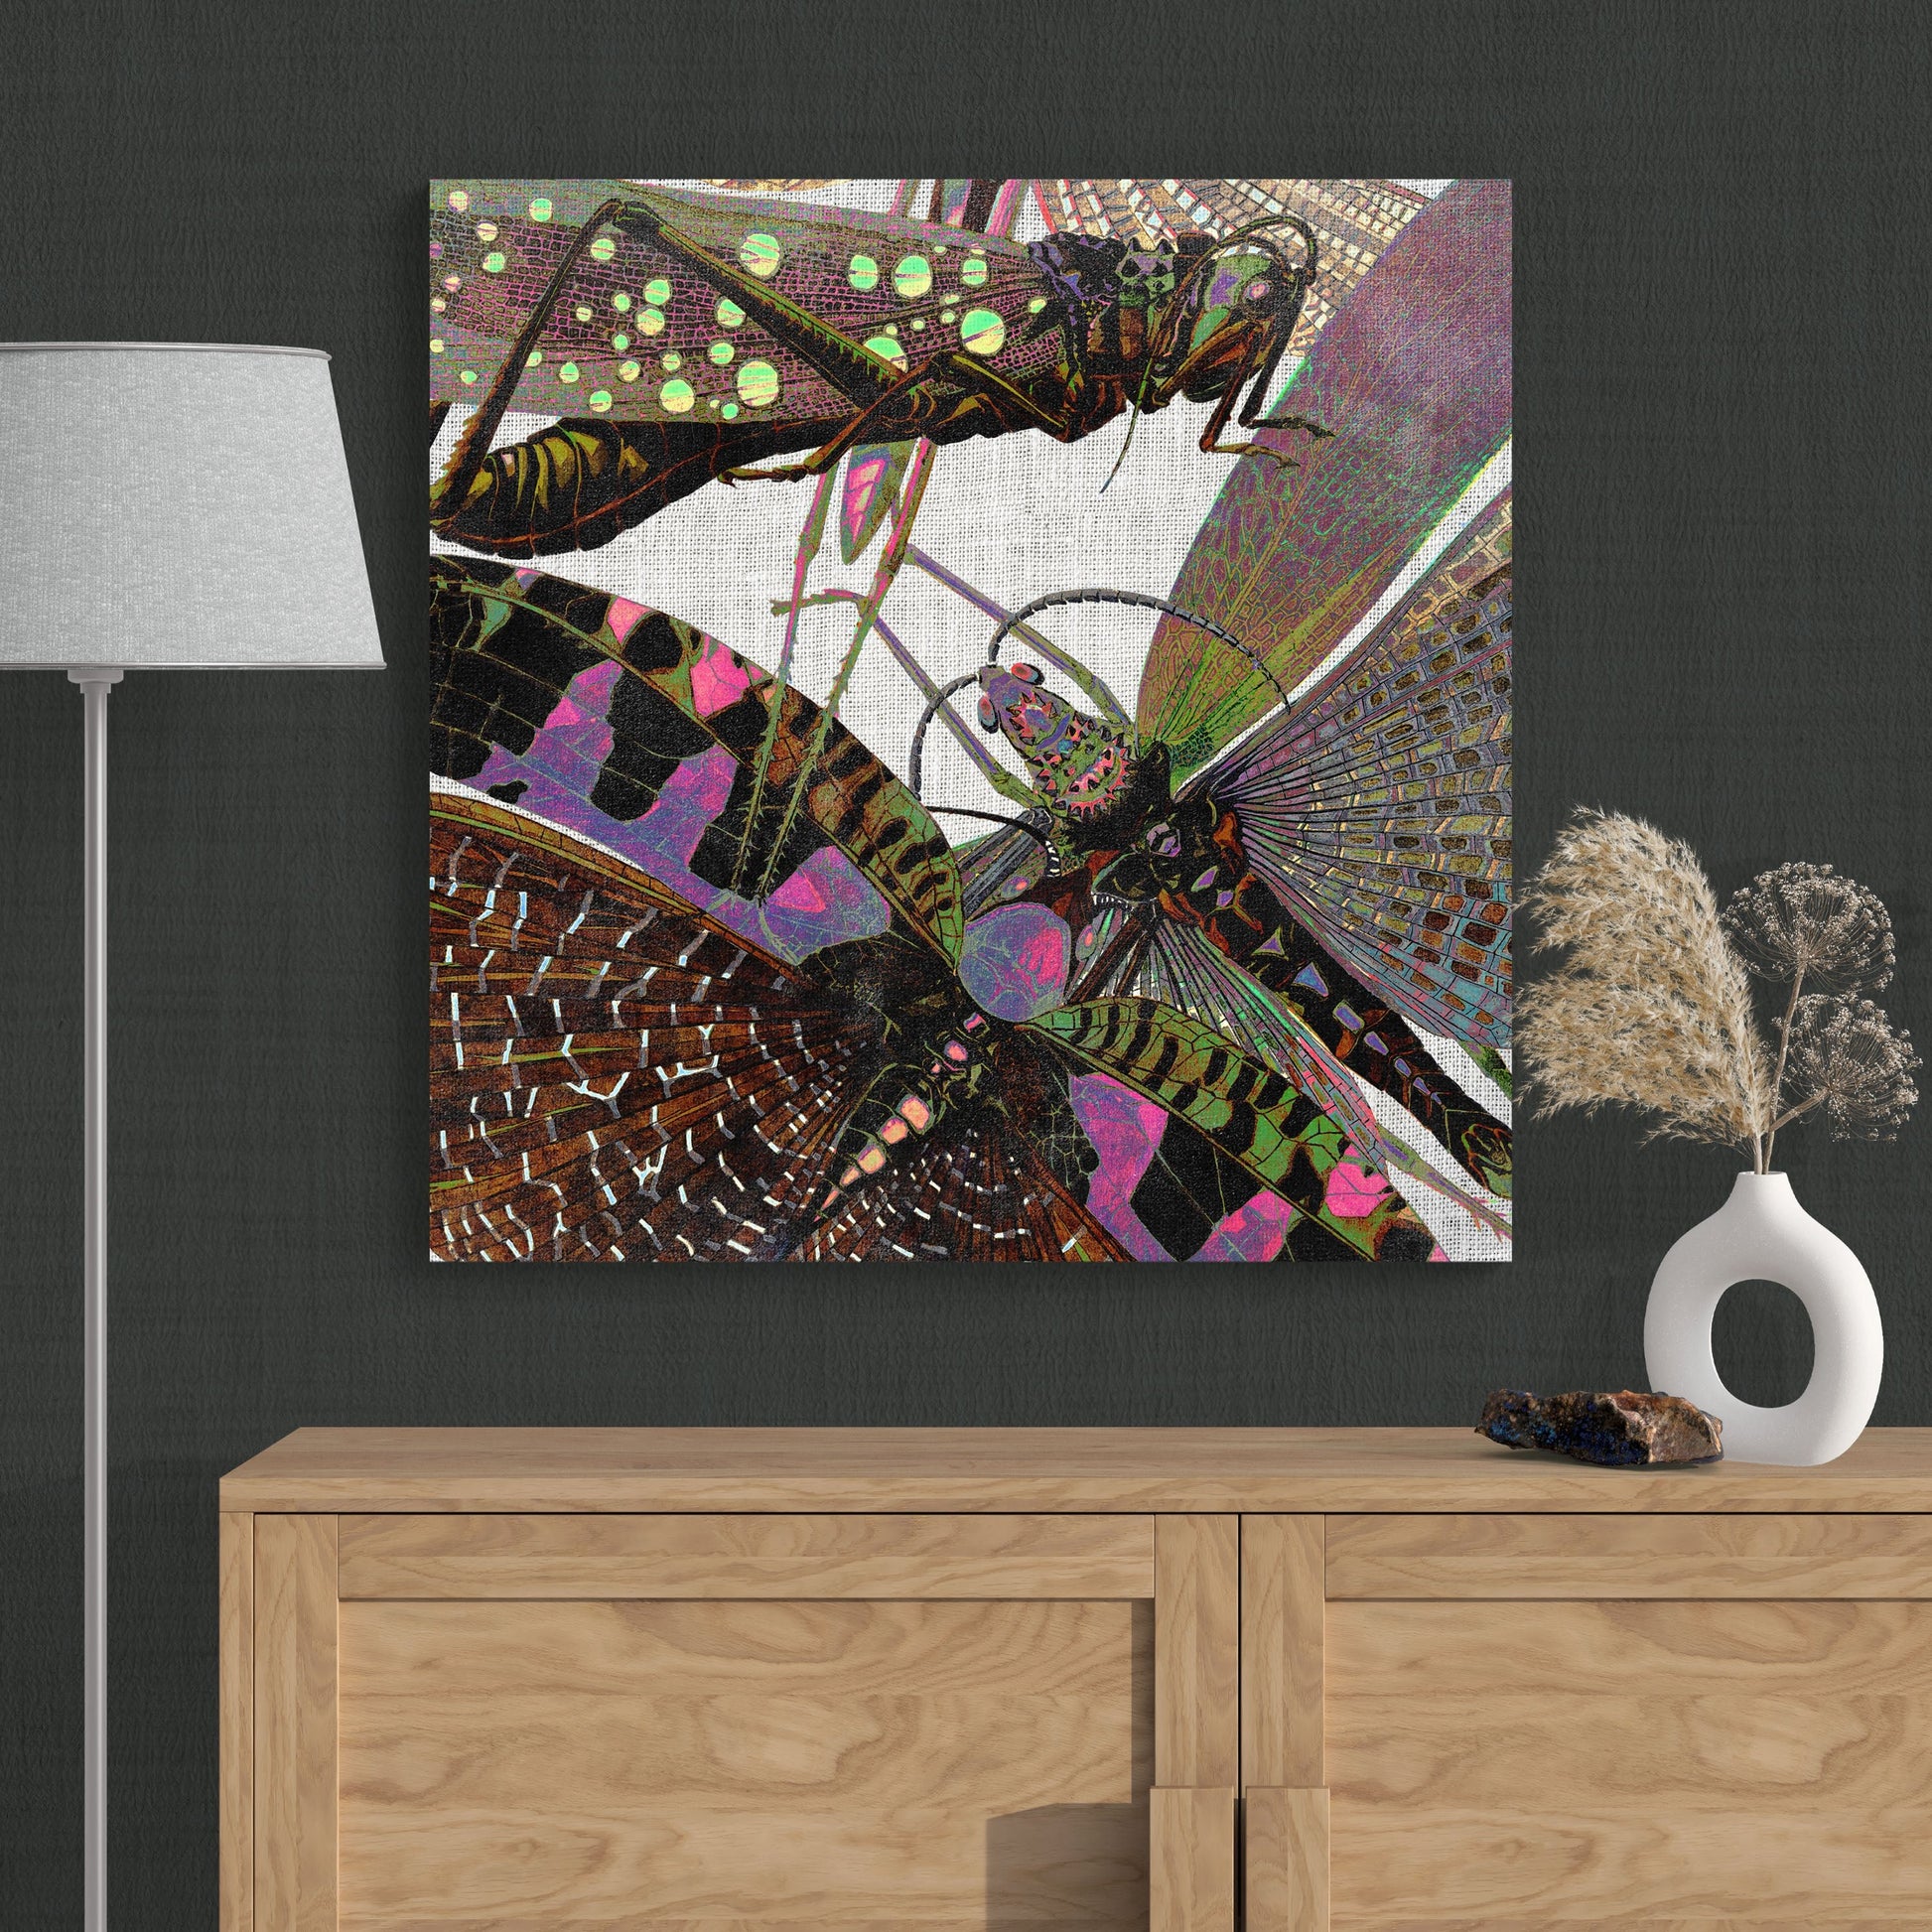 Abstract Insects Locust Collage - Colorful Nature Canvas Wall Art - Retro Reverence